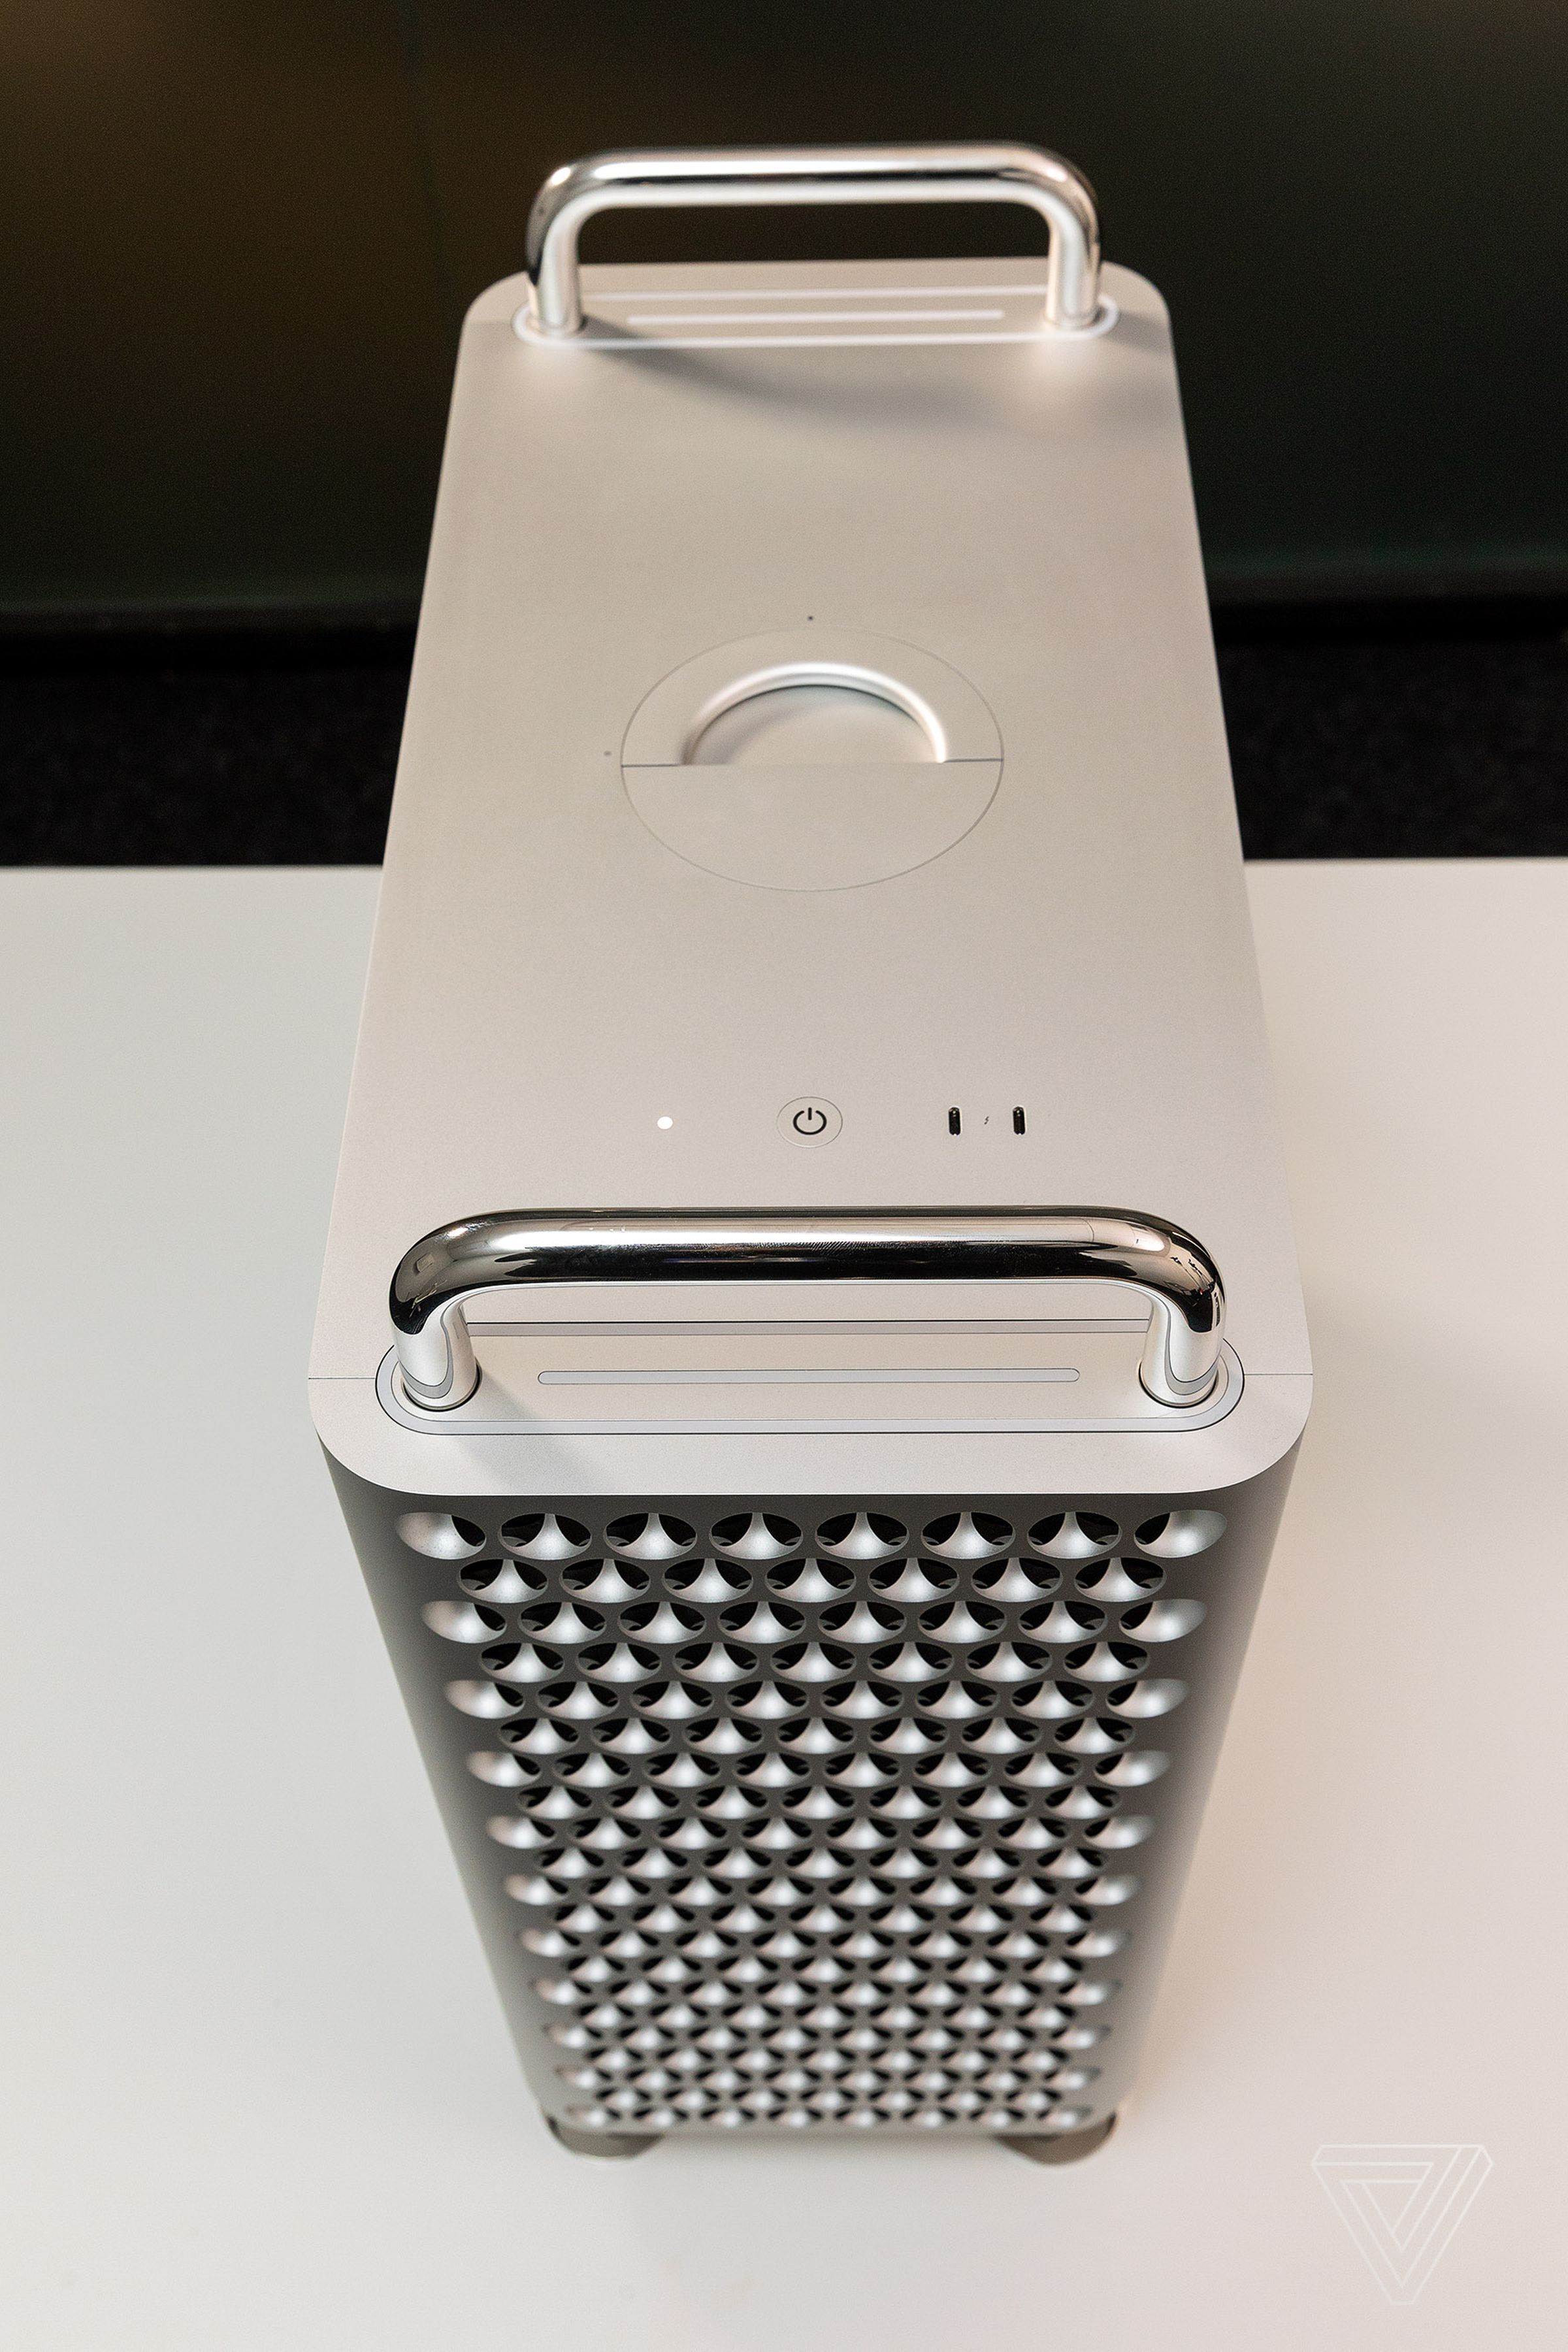 Top of the Mac Pro